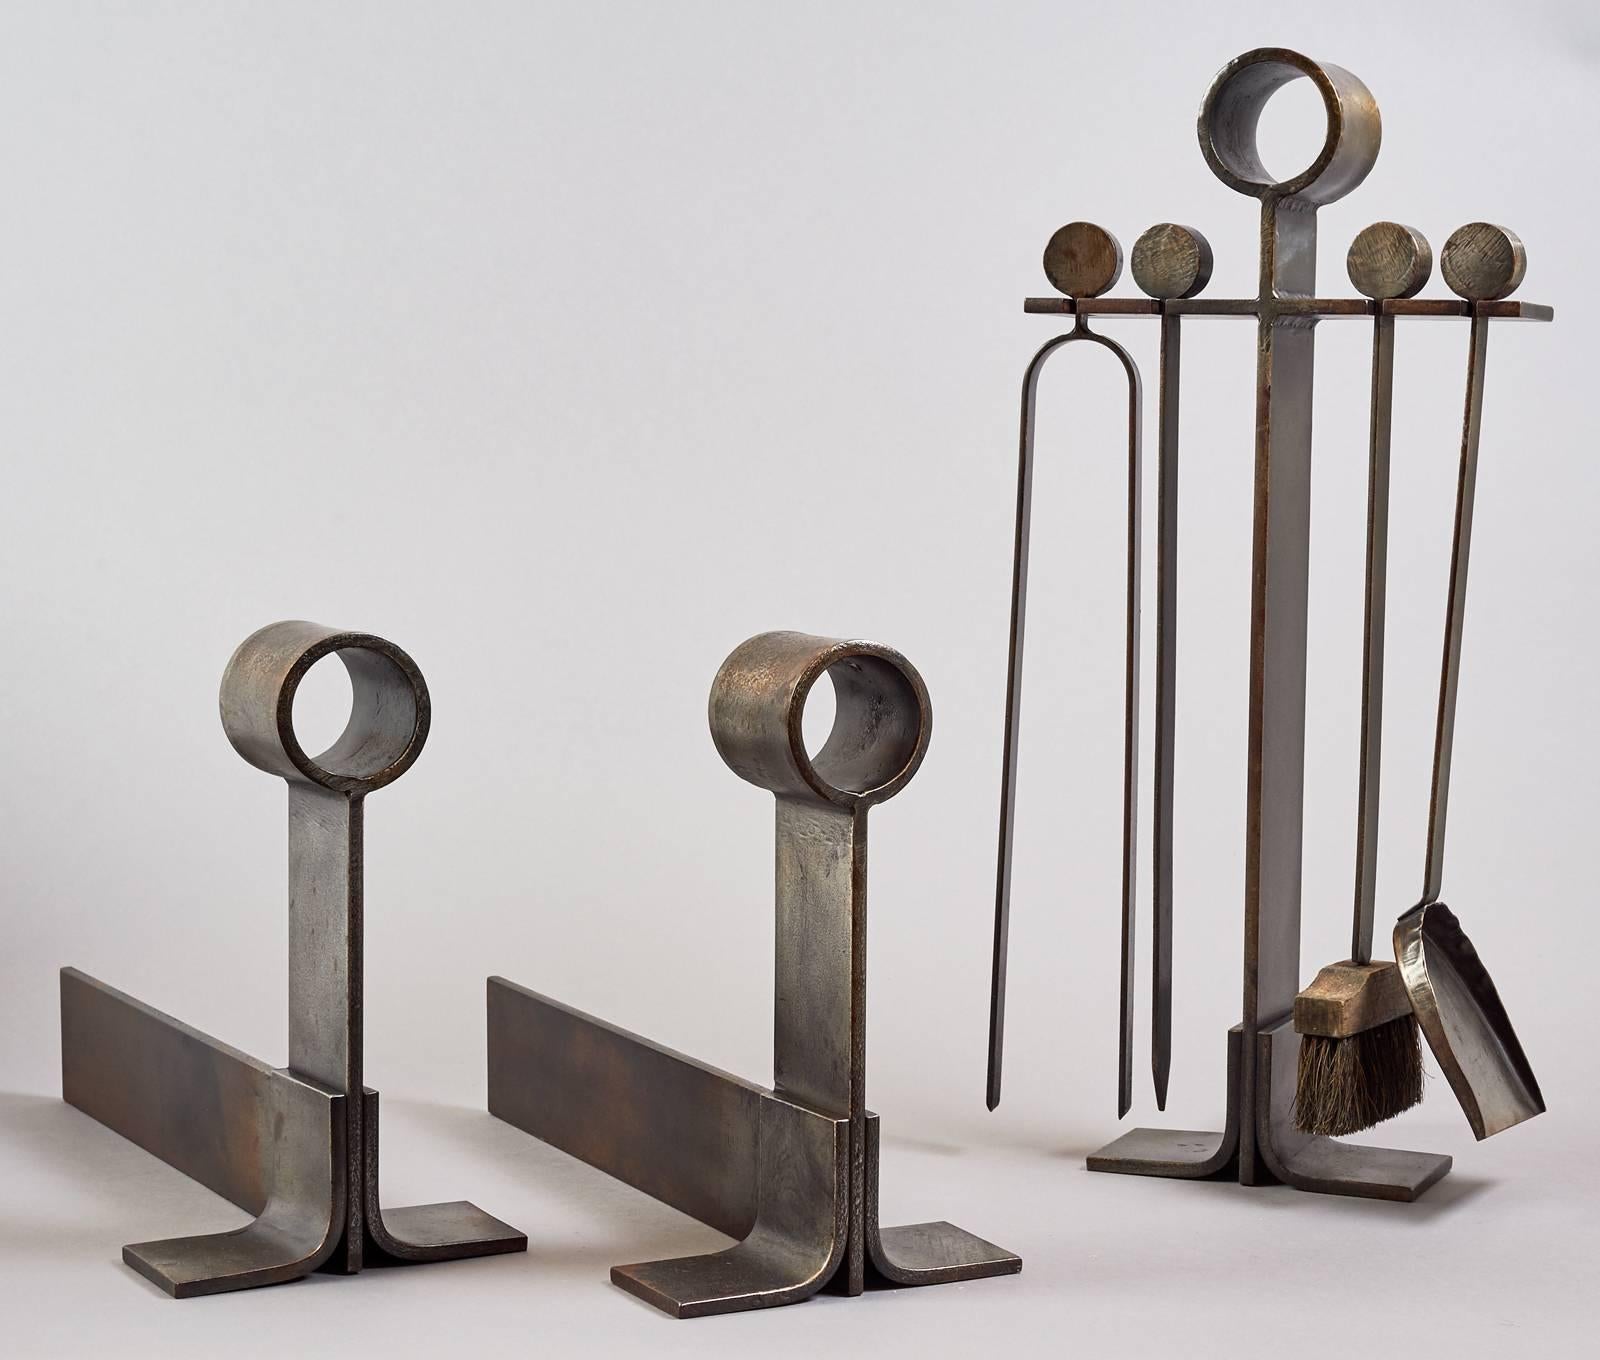 France, 1950s.

A complete set of modernist fire tools and andirons in beautifully worked massive wrought iron.

Andirons: 7 W x 18 D x 12 H.
Tools: 11 x 7 x 23 H.